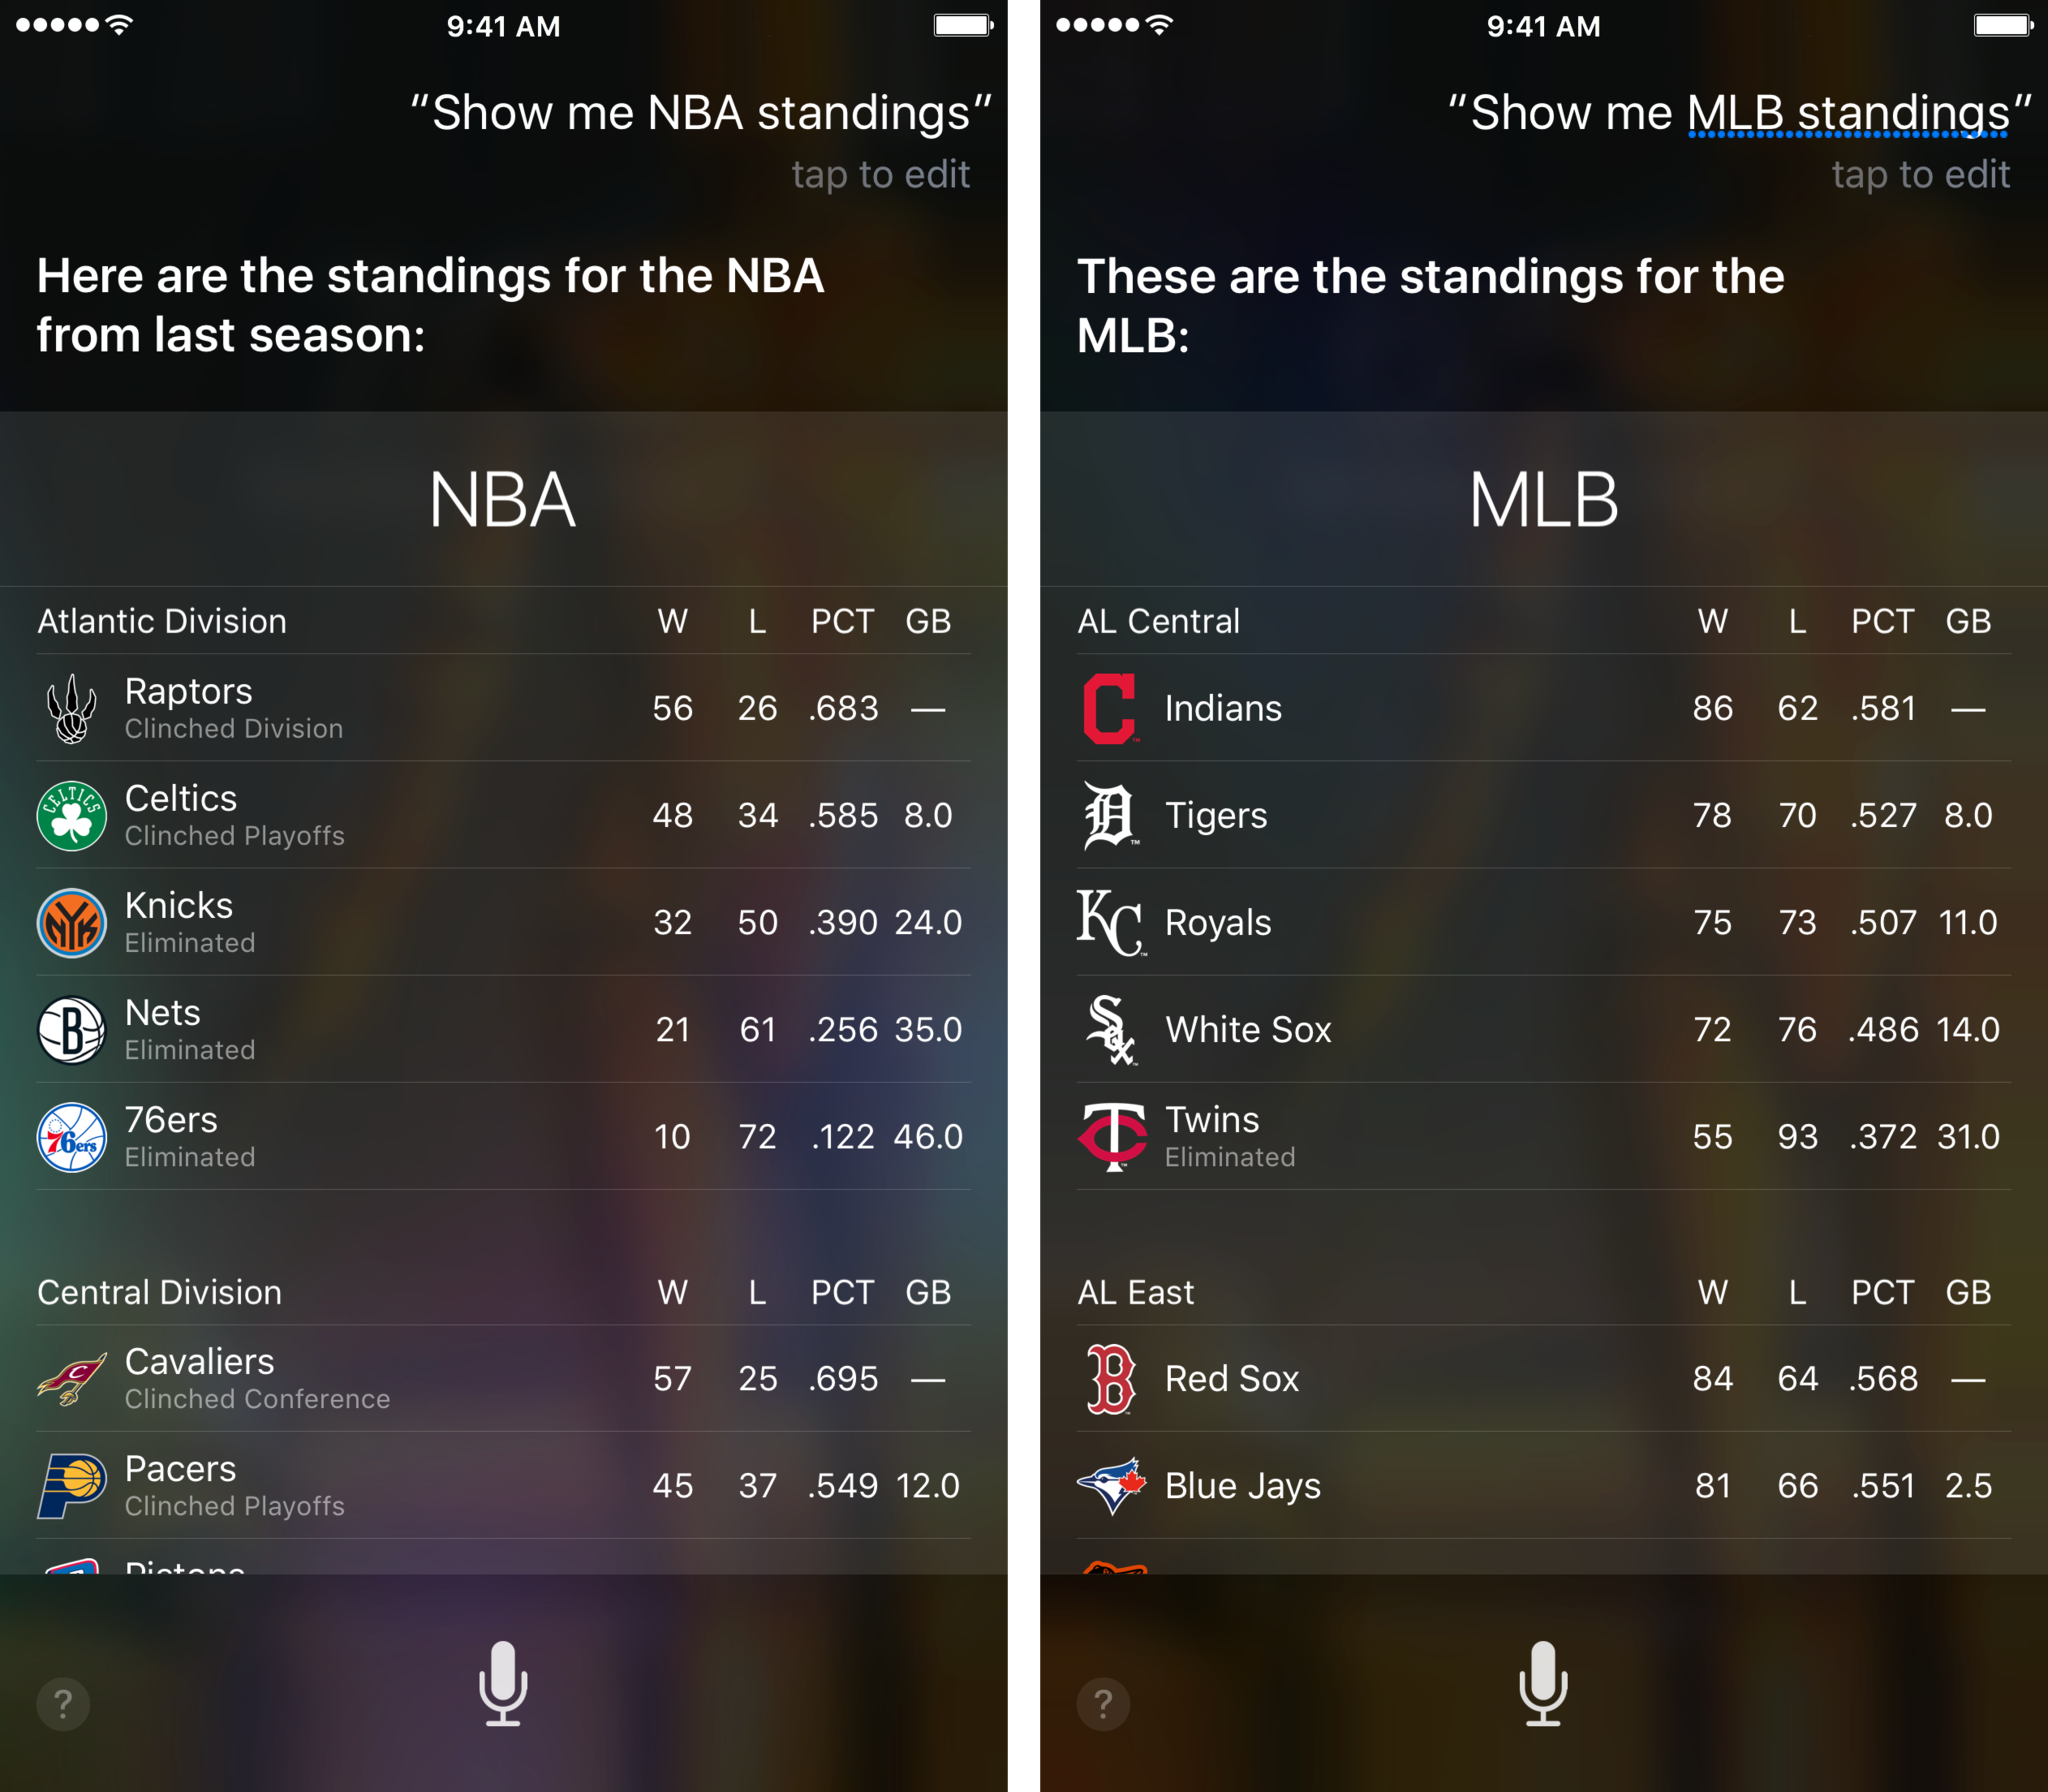 Ask Siri about the league standings